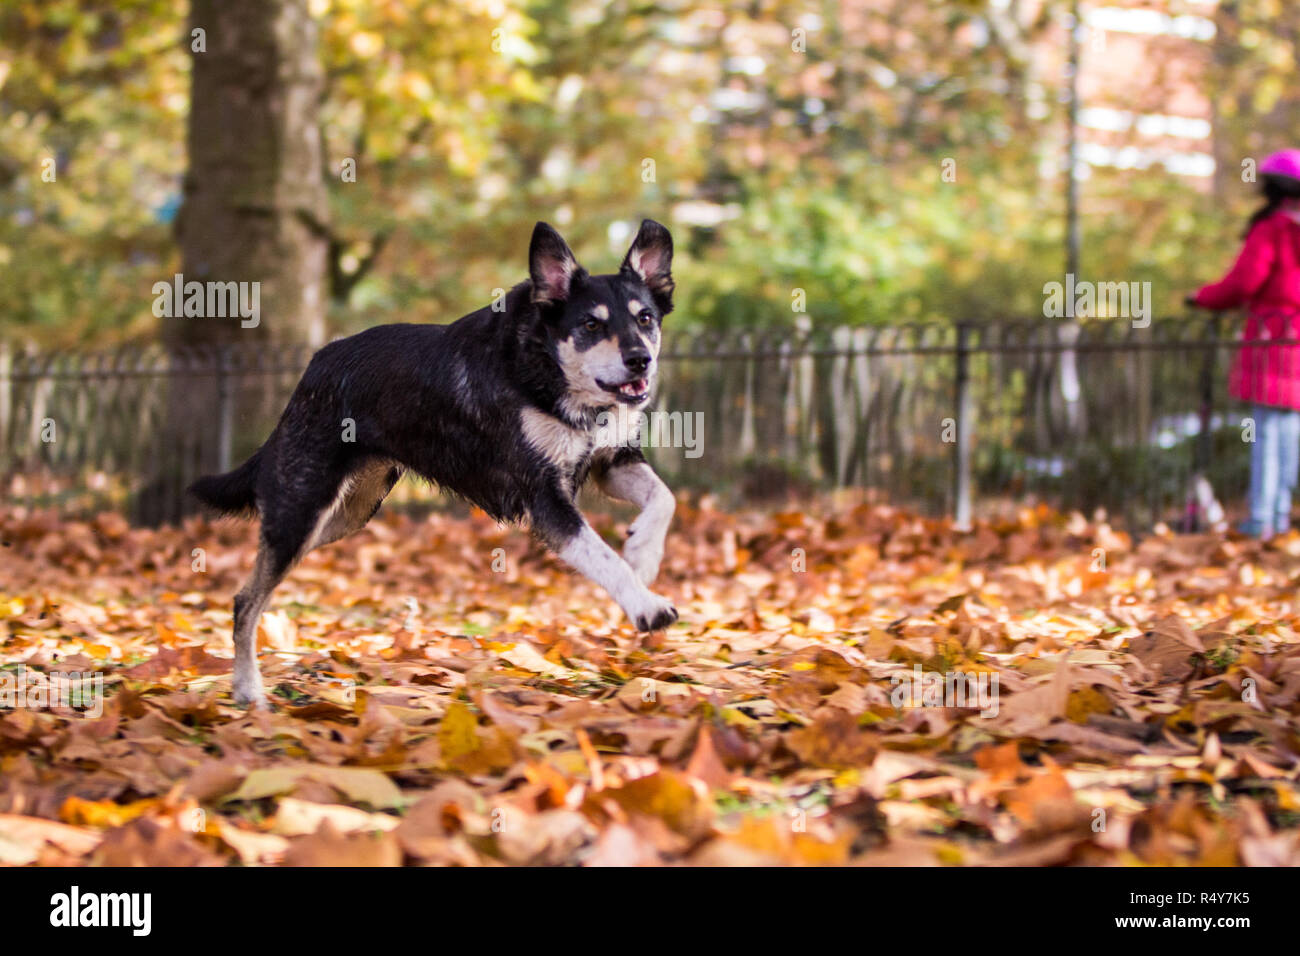 Dog playing in Autumn leaves Stock Photo